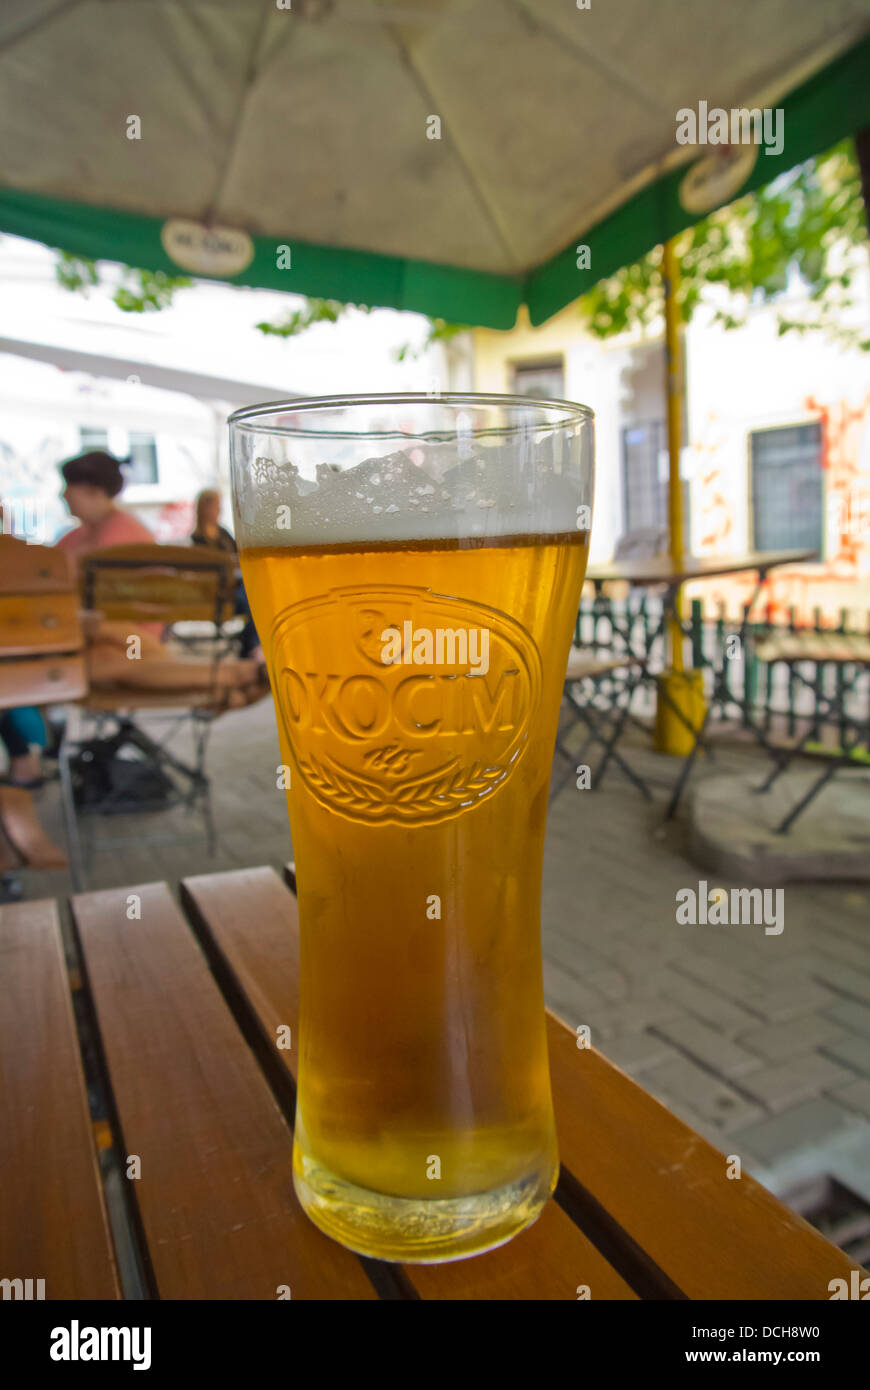 Local beer Nowy Swiat 22 courtyard the Secret Garden central Warsaw Poland Europe Stock Photo